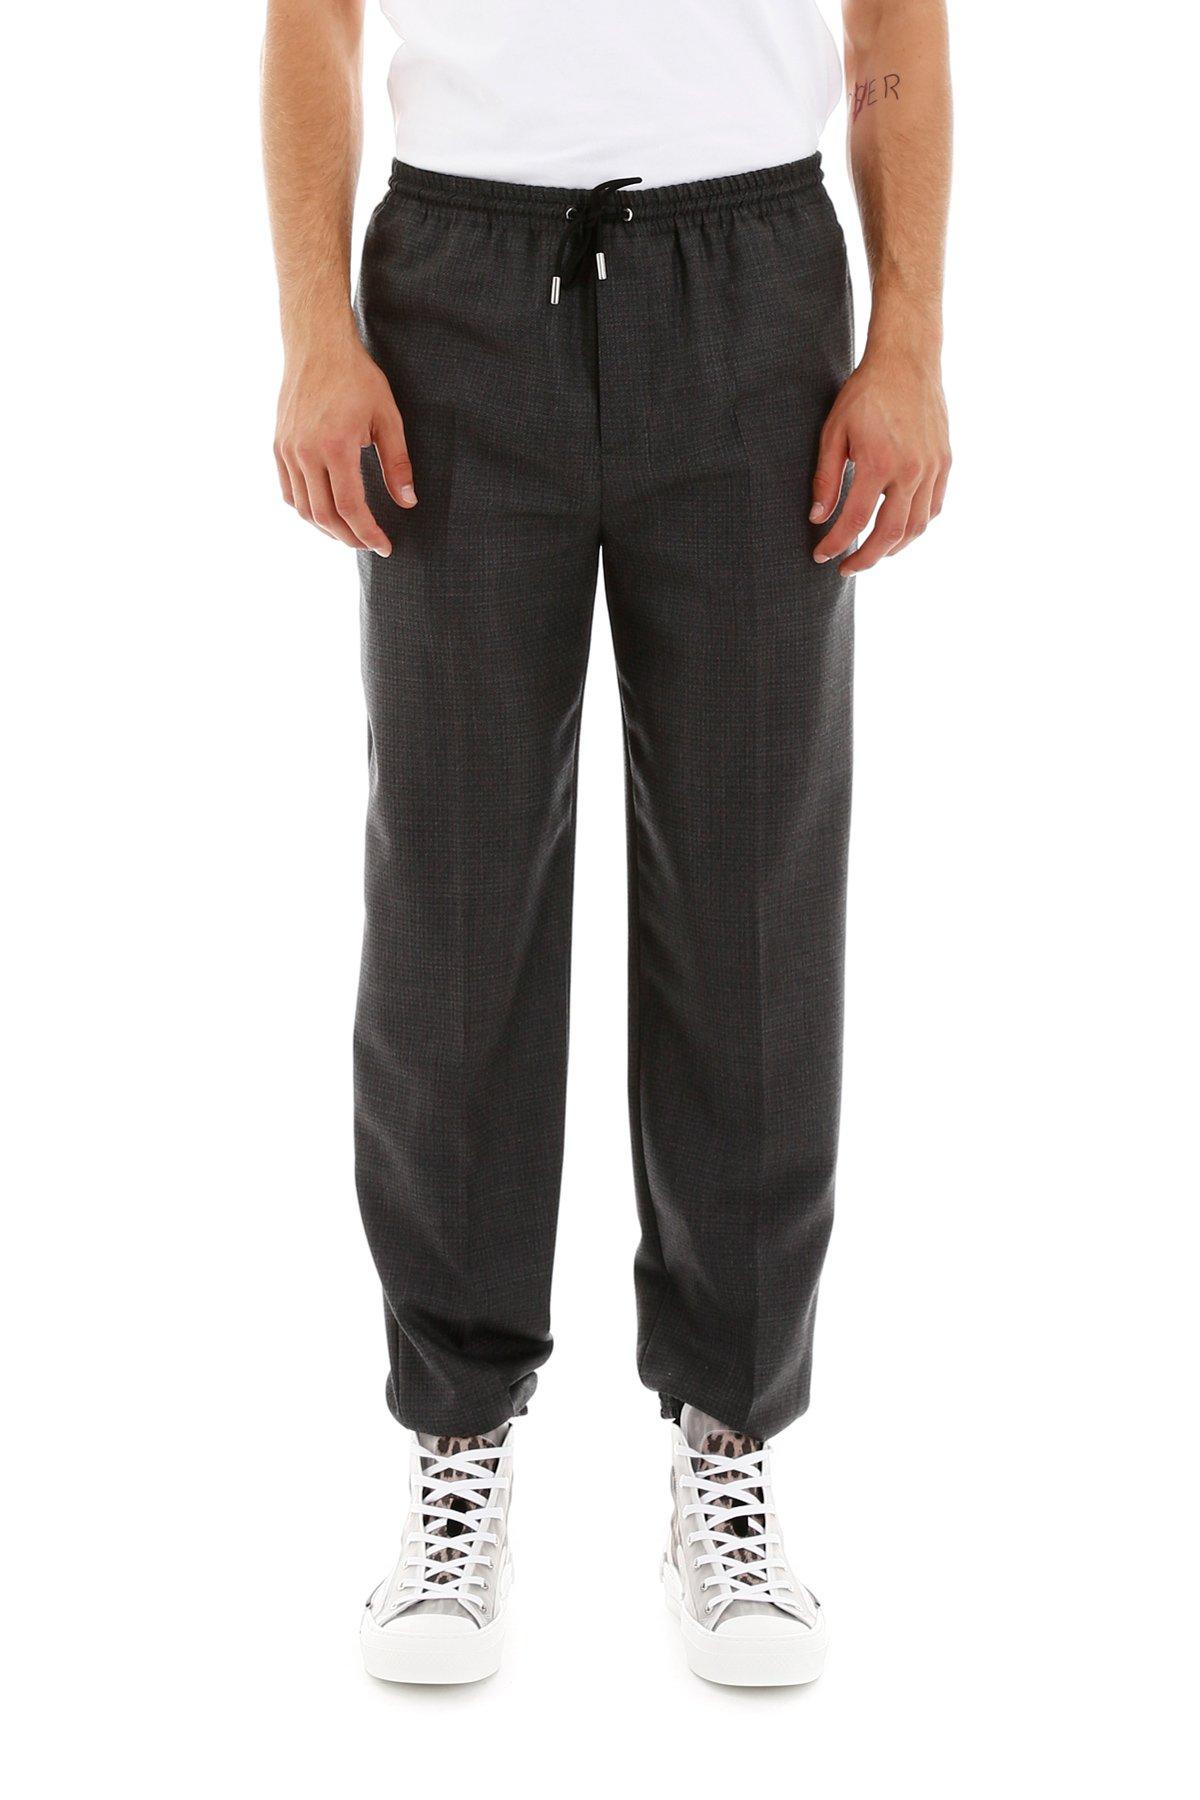 Dior Wool joggers in Grey (Gray) for Men - Lyst